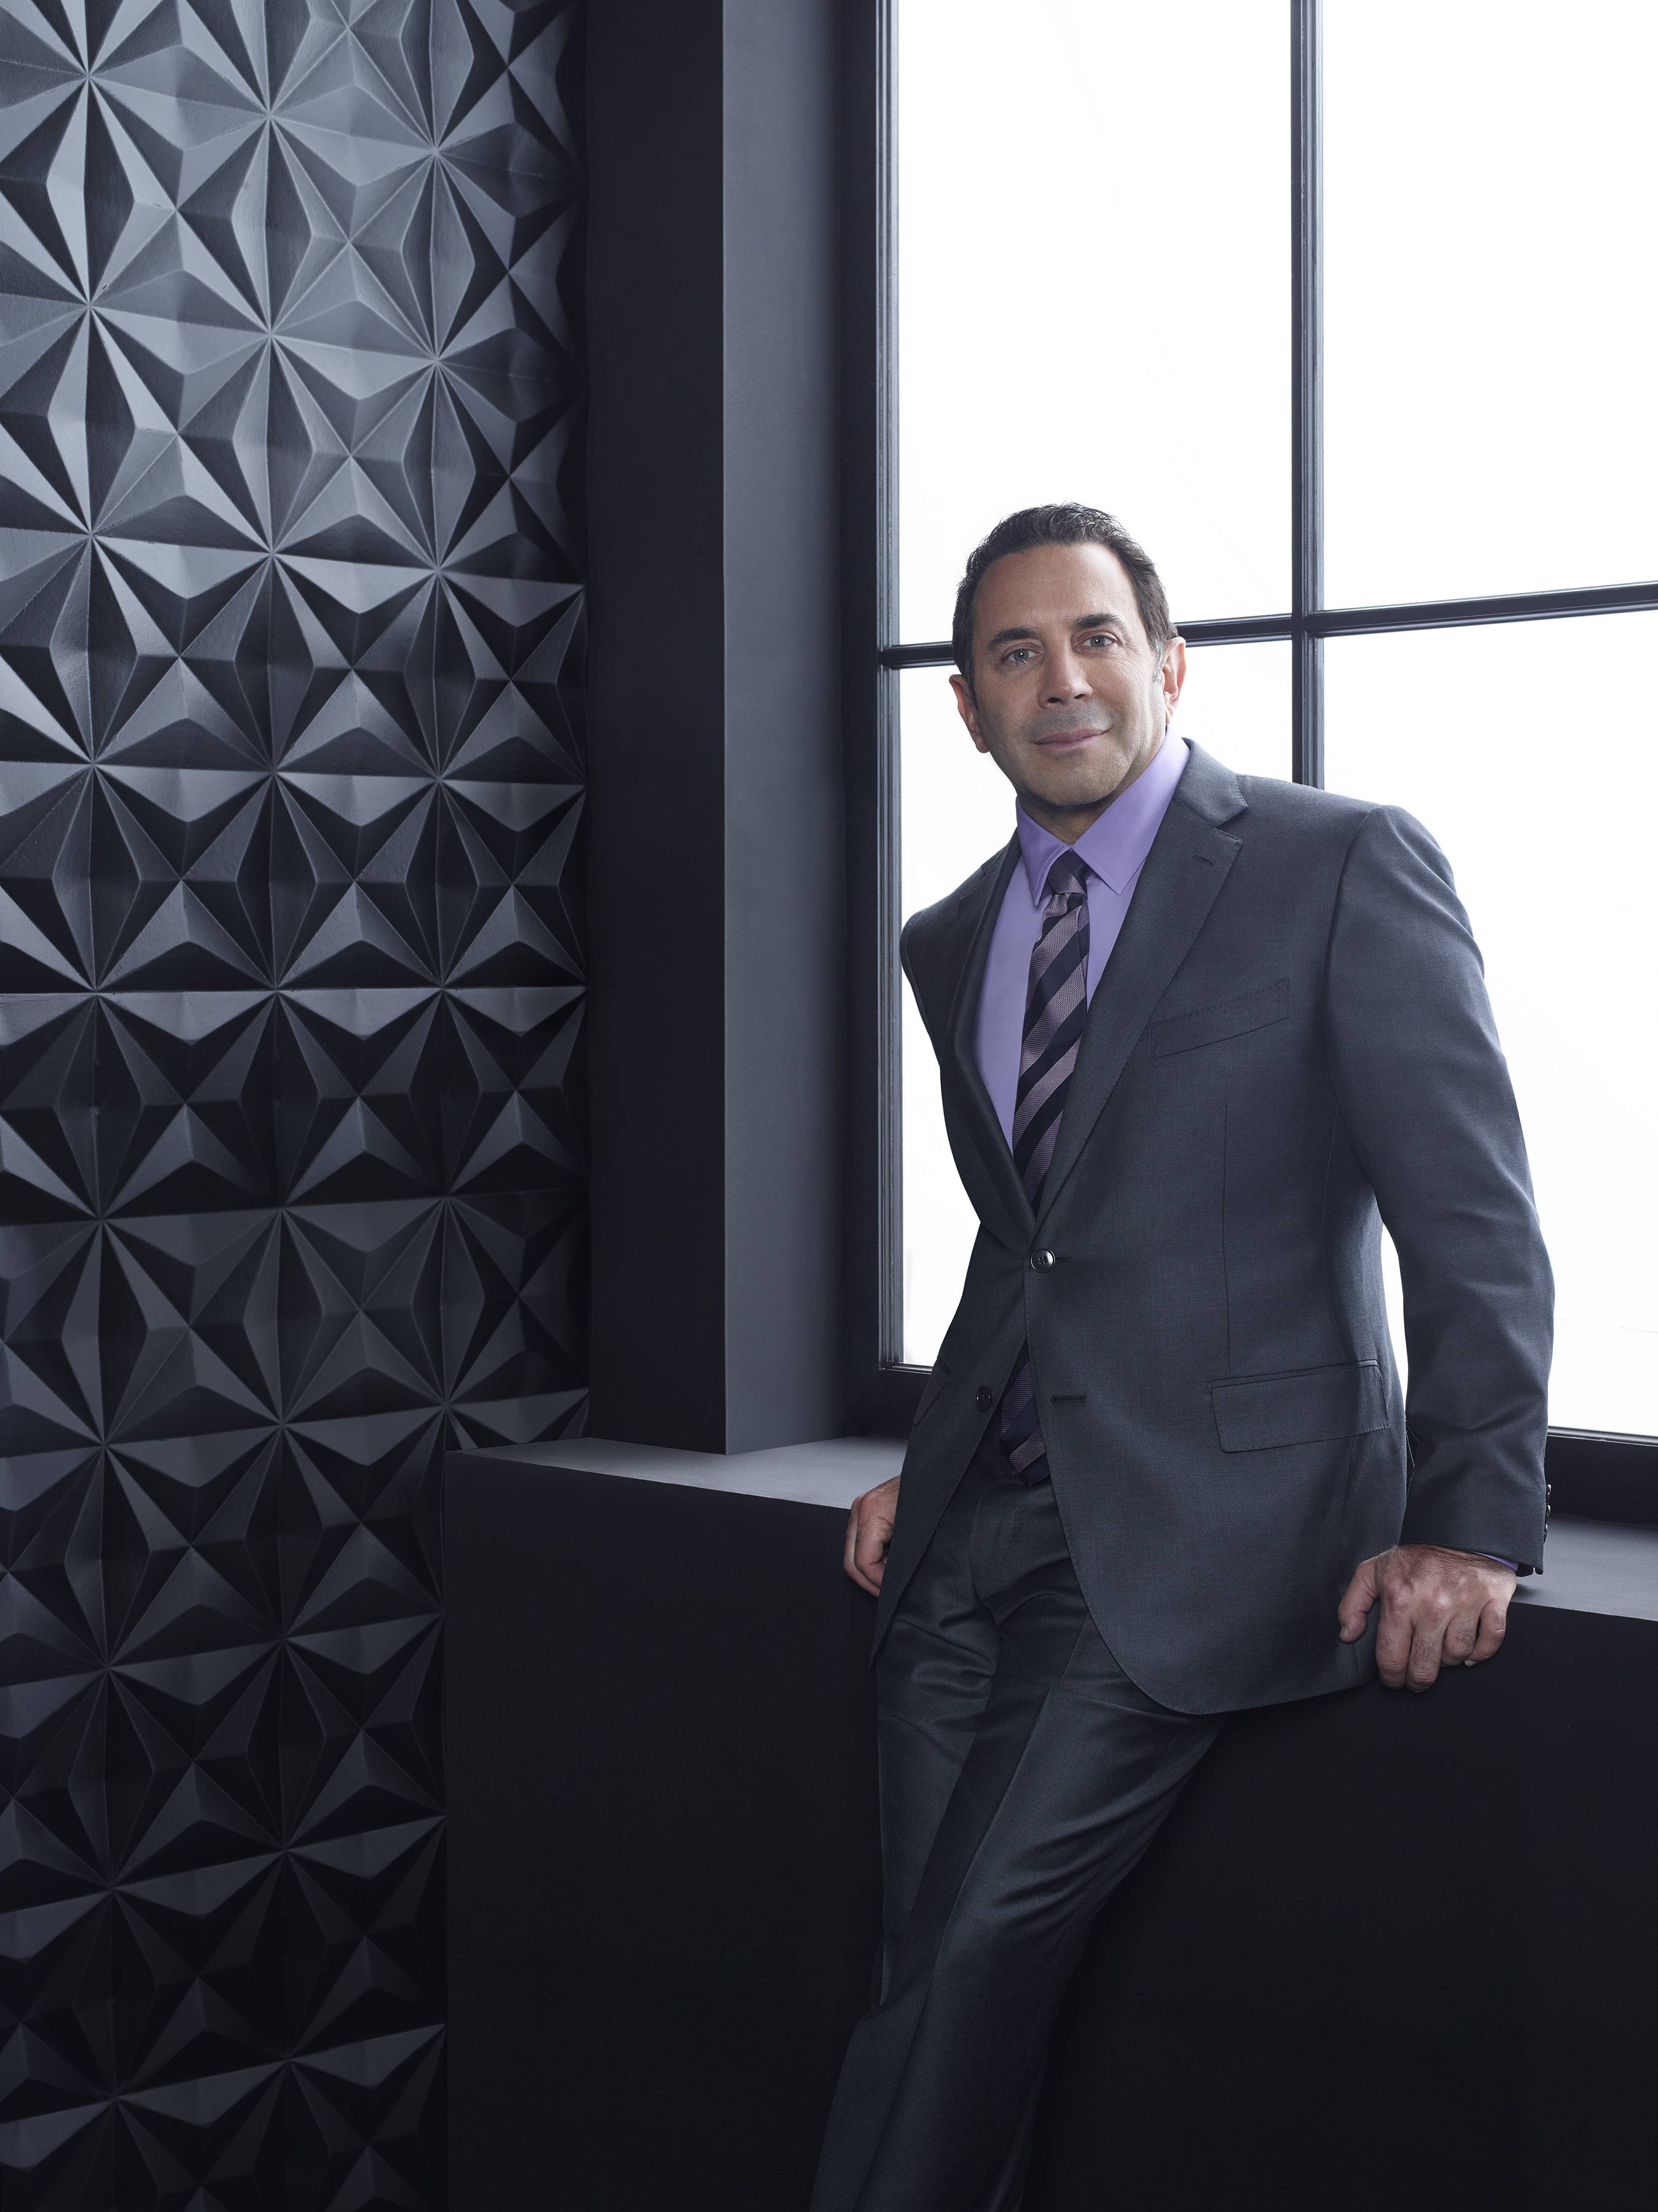 Dr. Paul Nassif shares how Botched makes positive change, interview